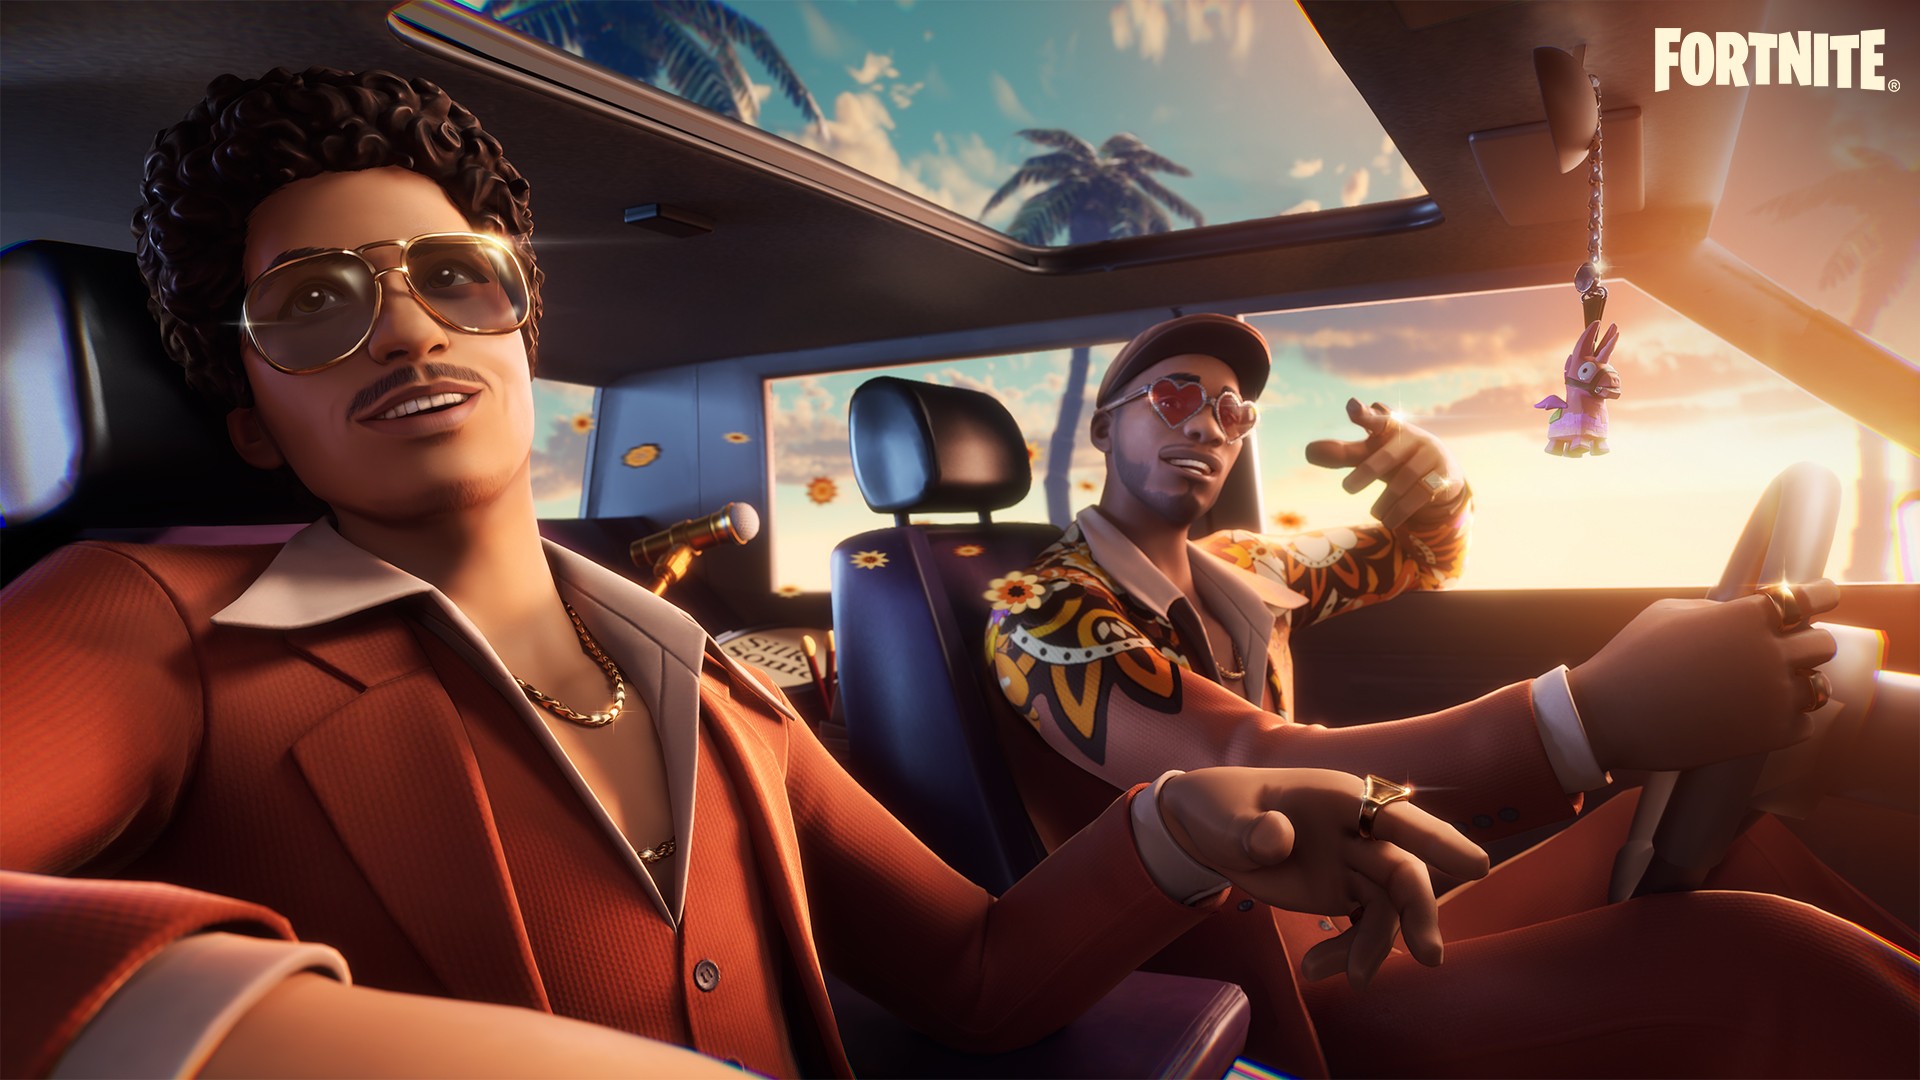  Bruno Mars joins Fortnite, because why not? 